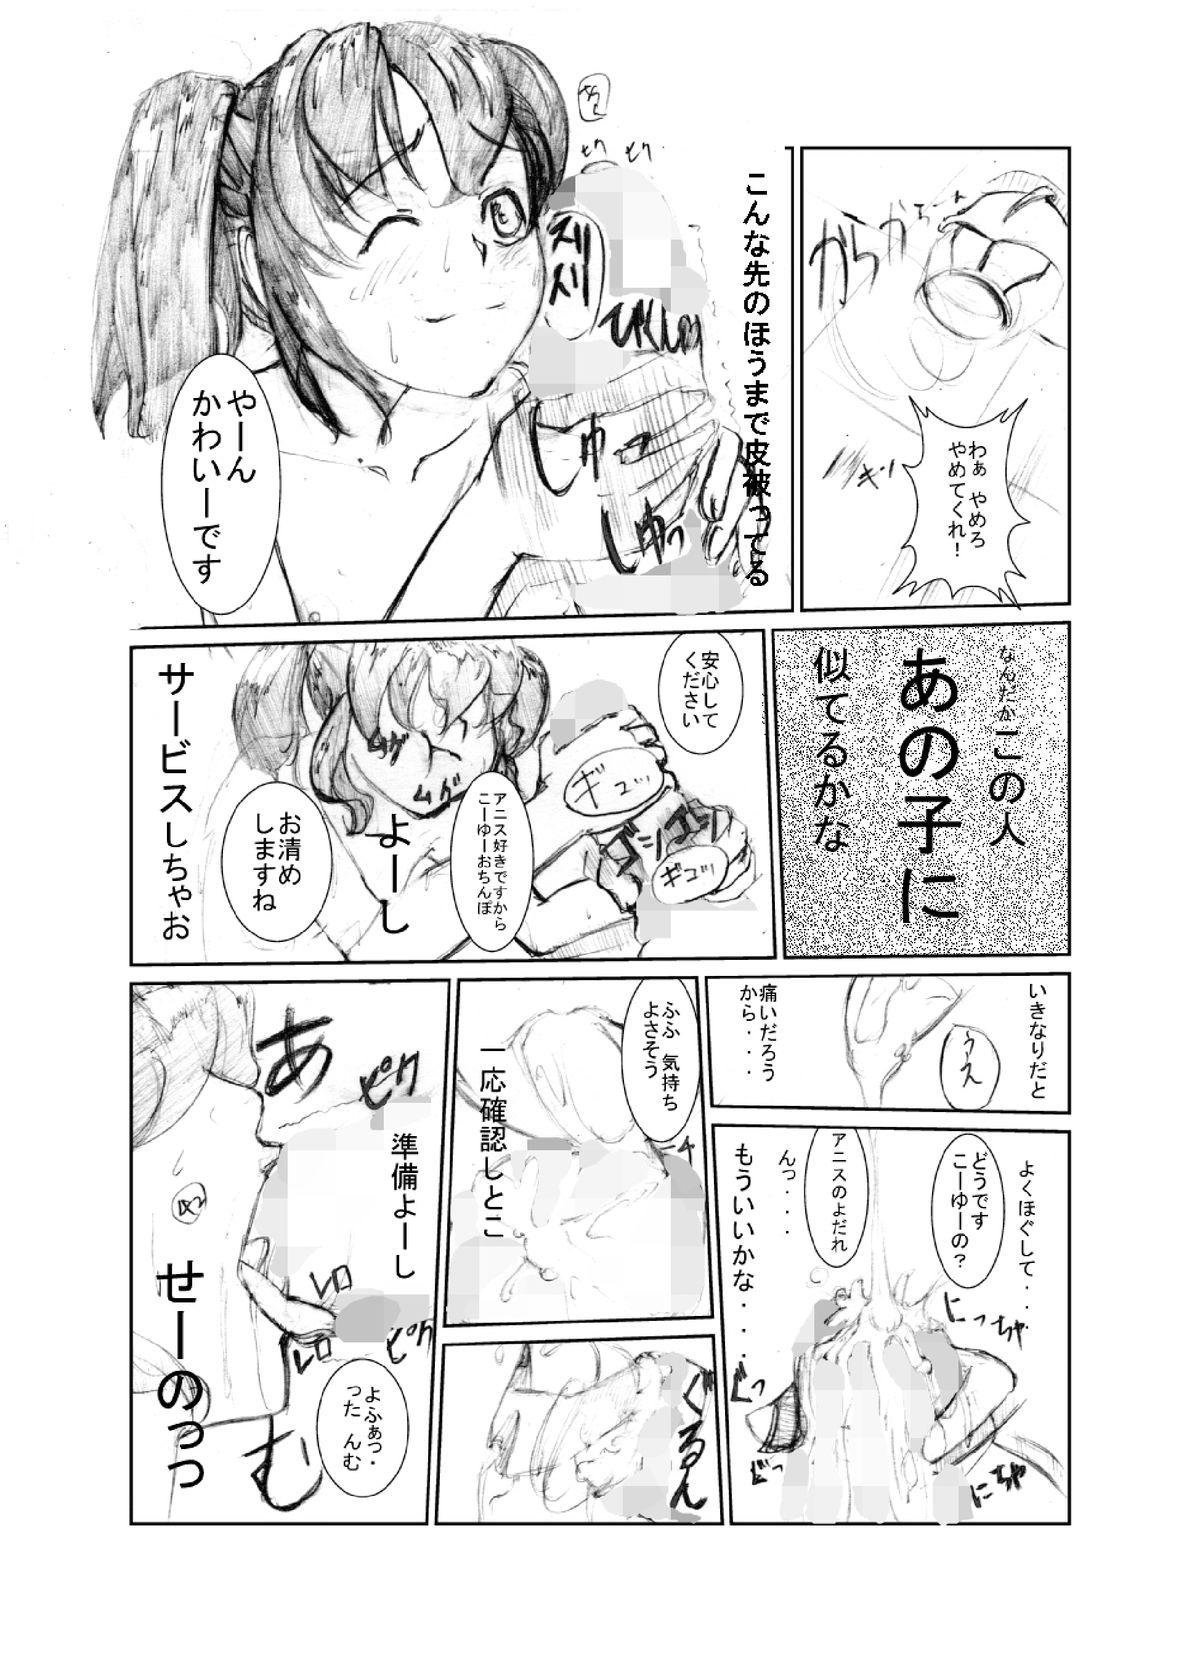 Pounded 虹は溶けゆく 朝焼けに - Tales of the abyss Gay Kissing - Page 11